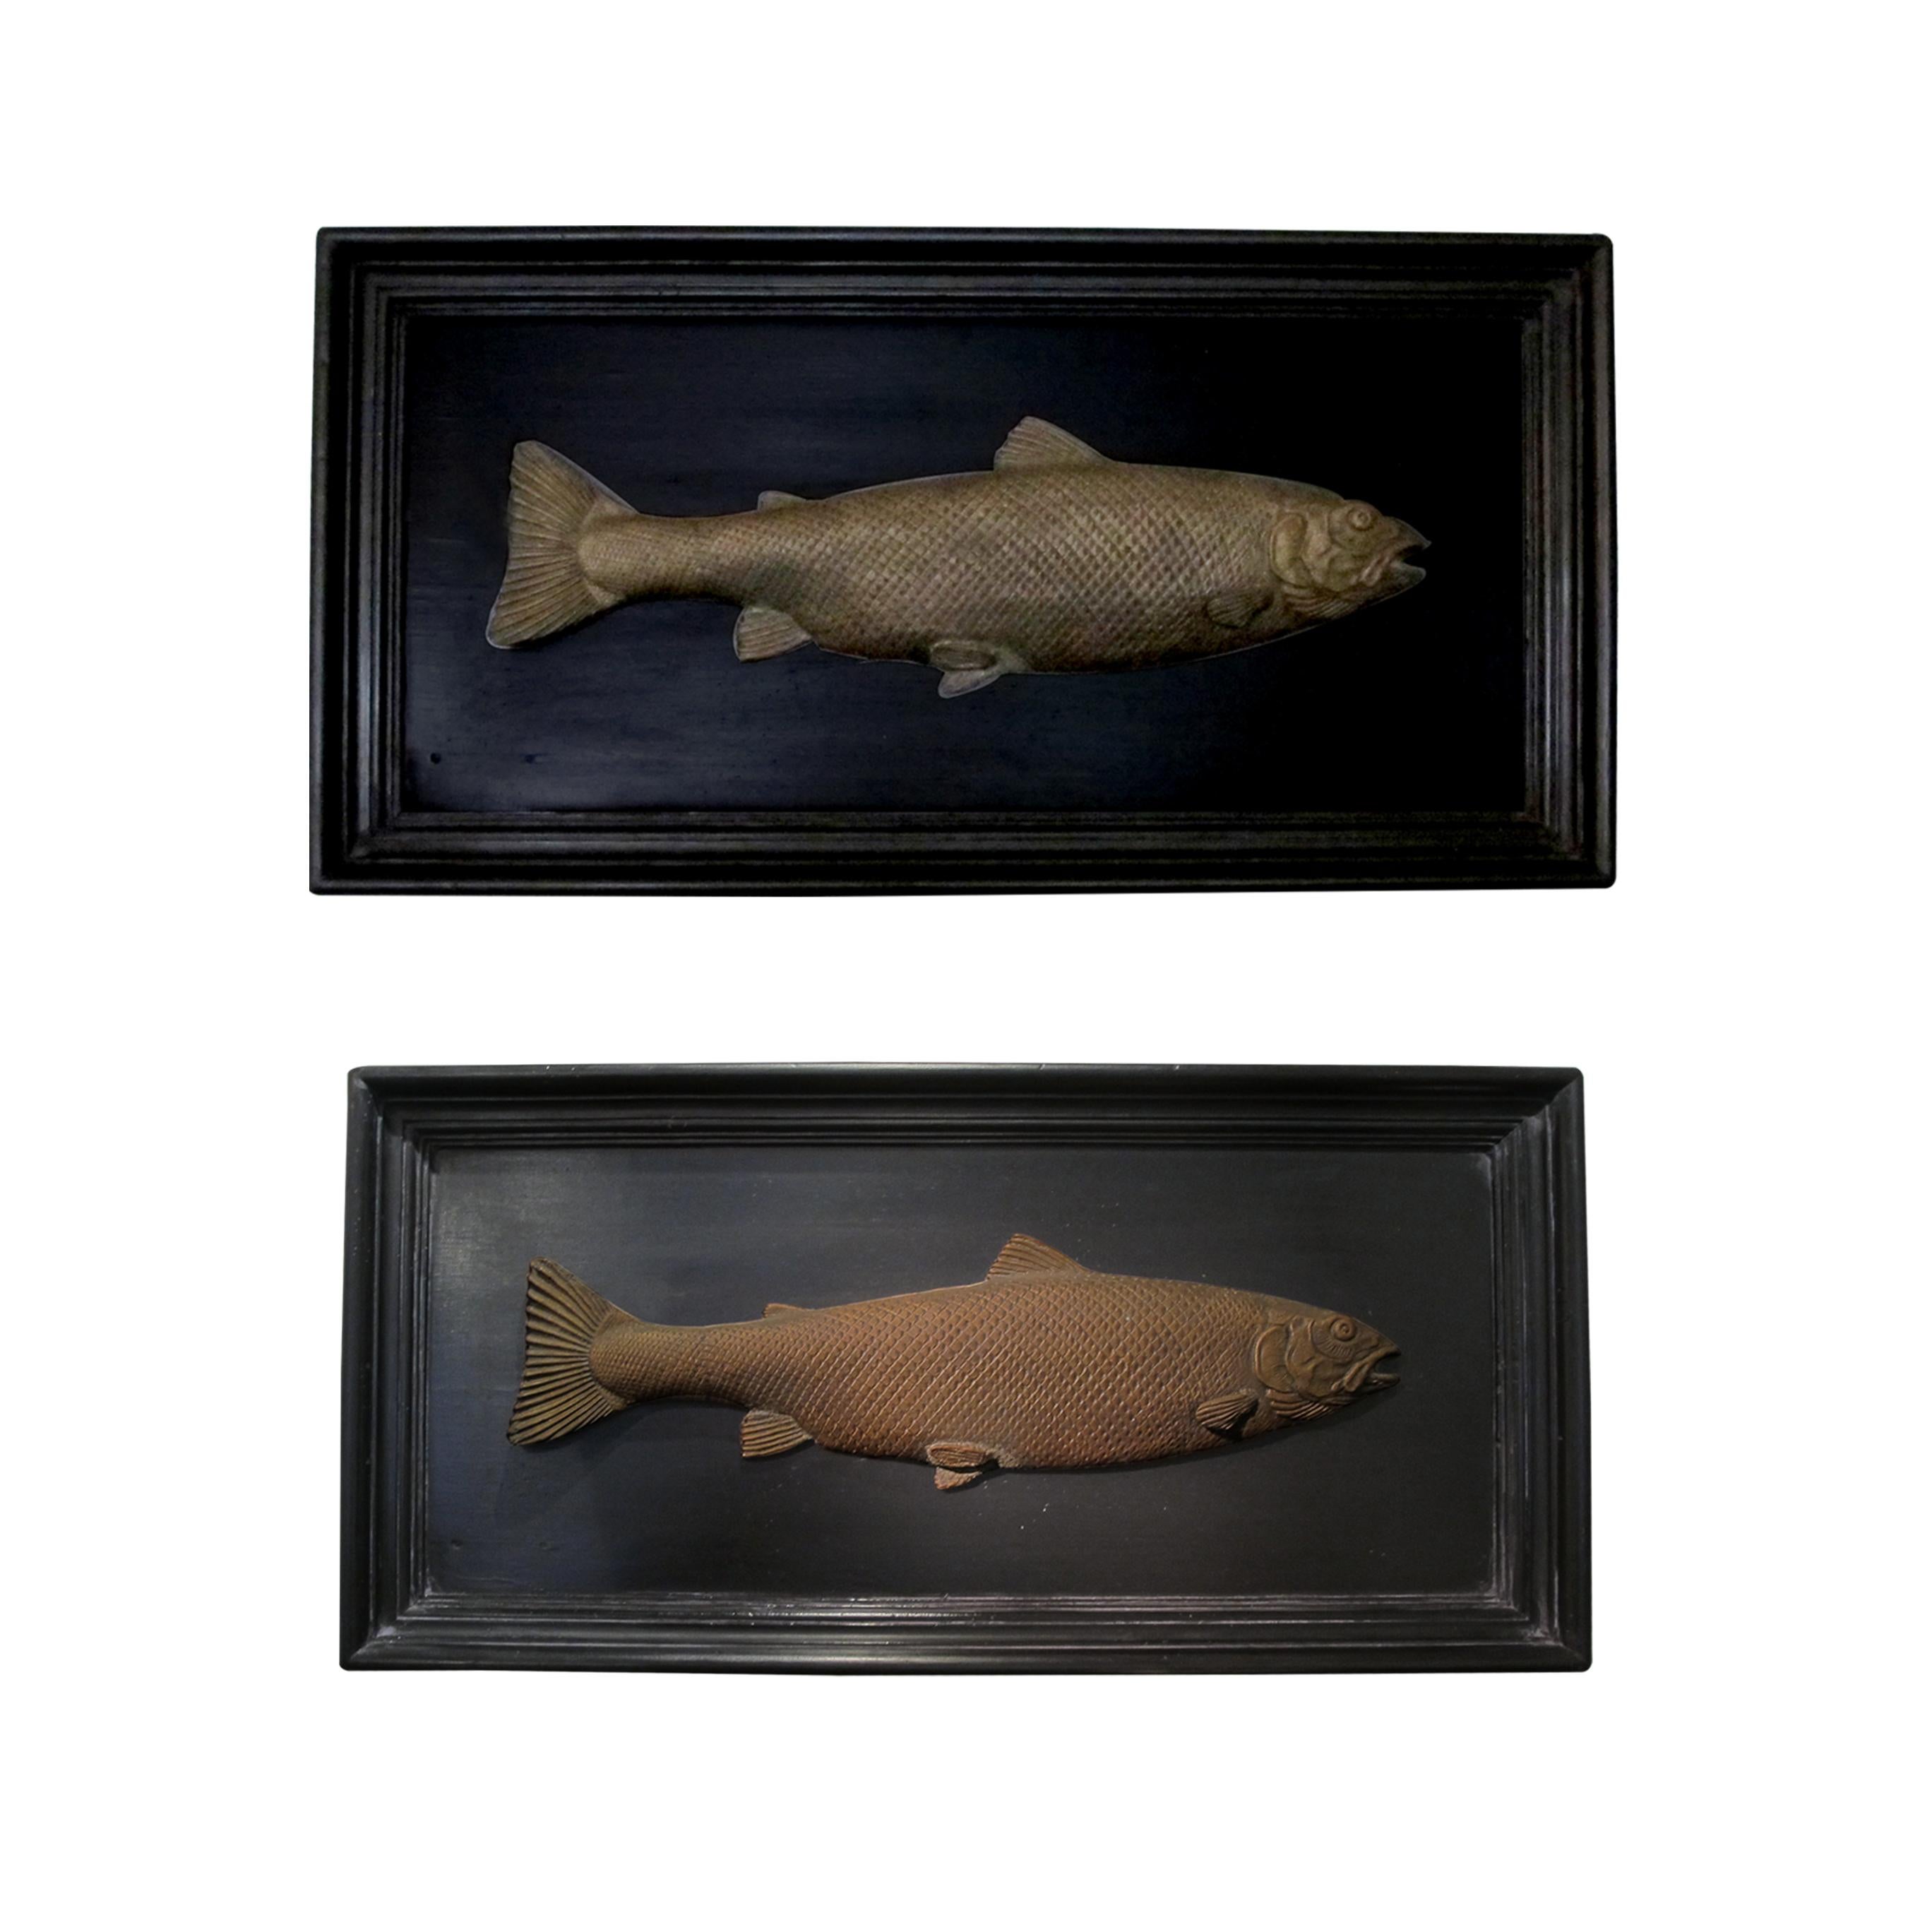 English Set of 6 Early 20th Century Bronze Freshwater Fish Mounted on a Black Frame